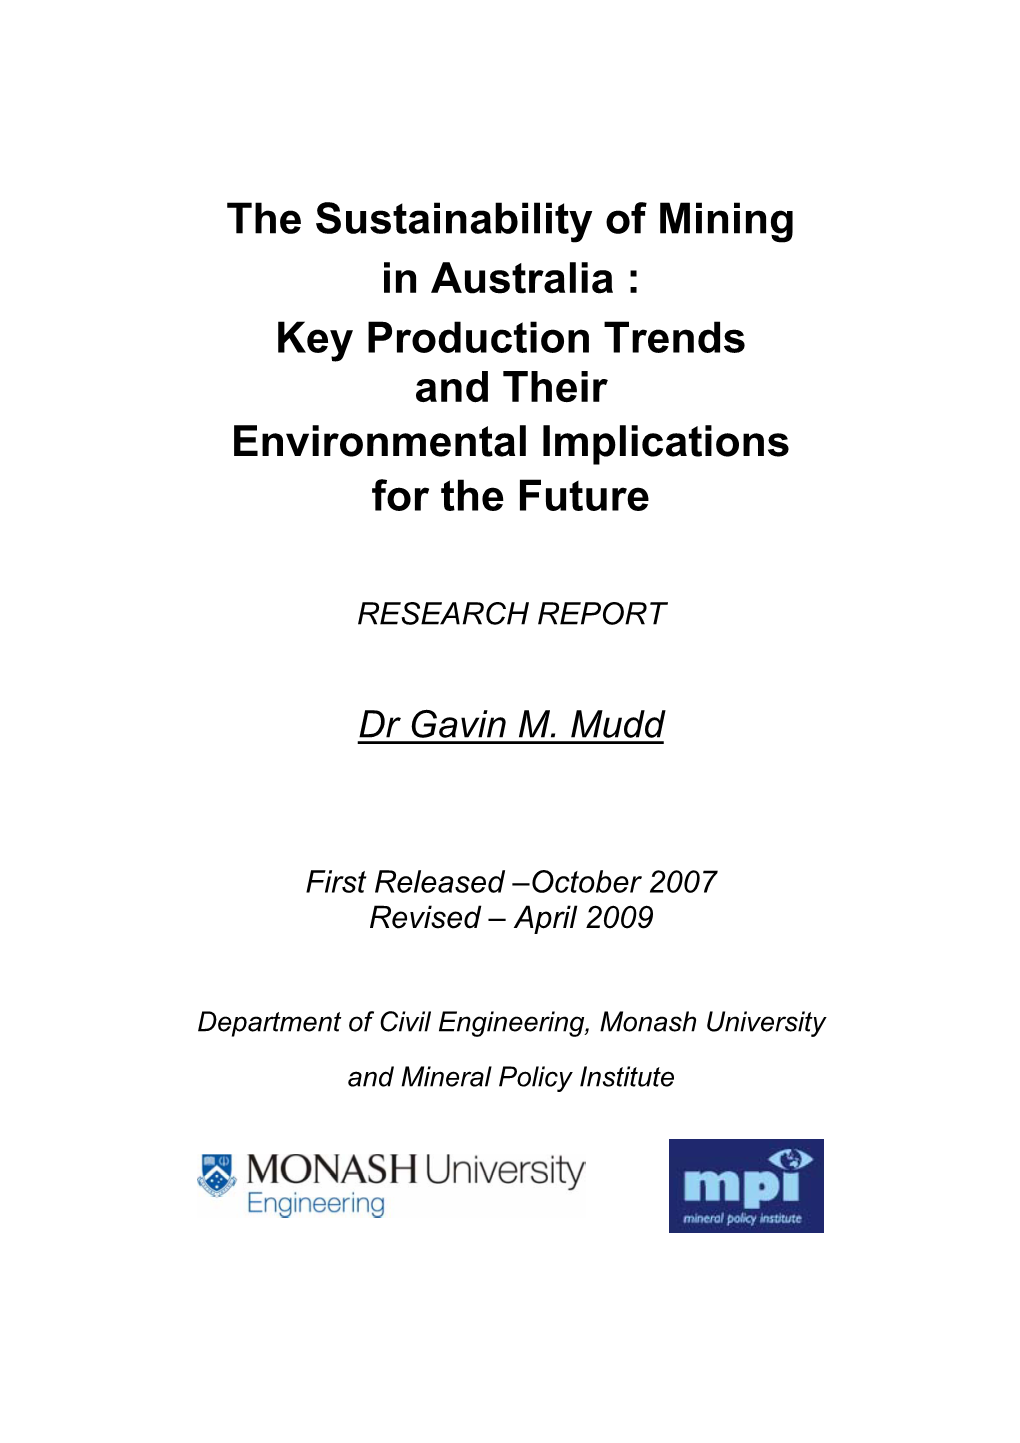 The Sustainability of Mining in Australia : Key Production Trends and Their Environmental Implications for the Future